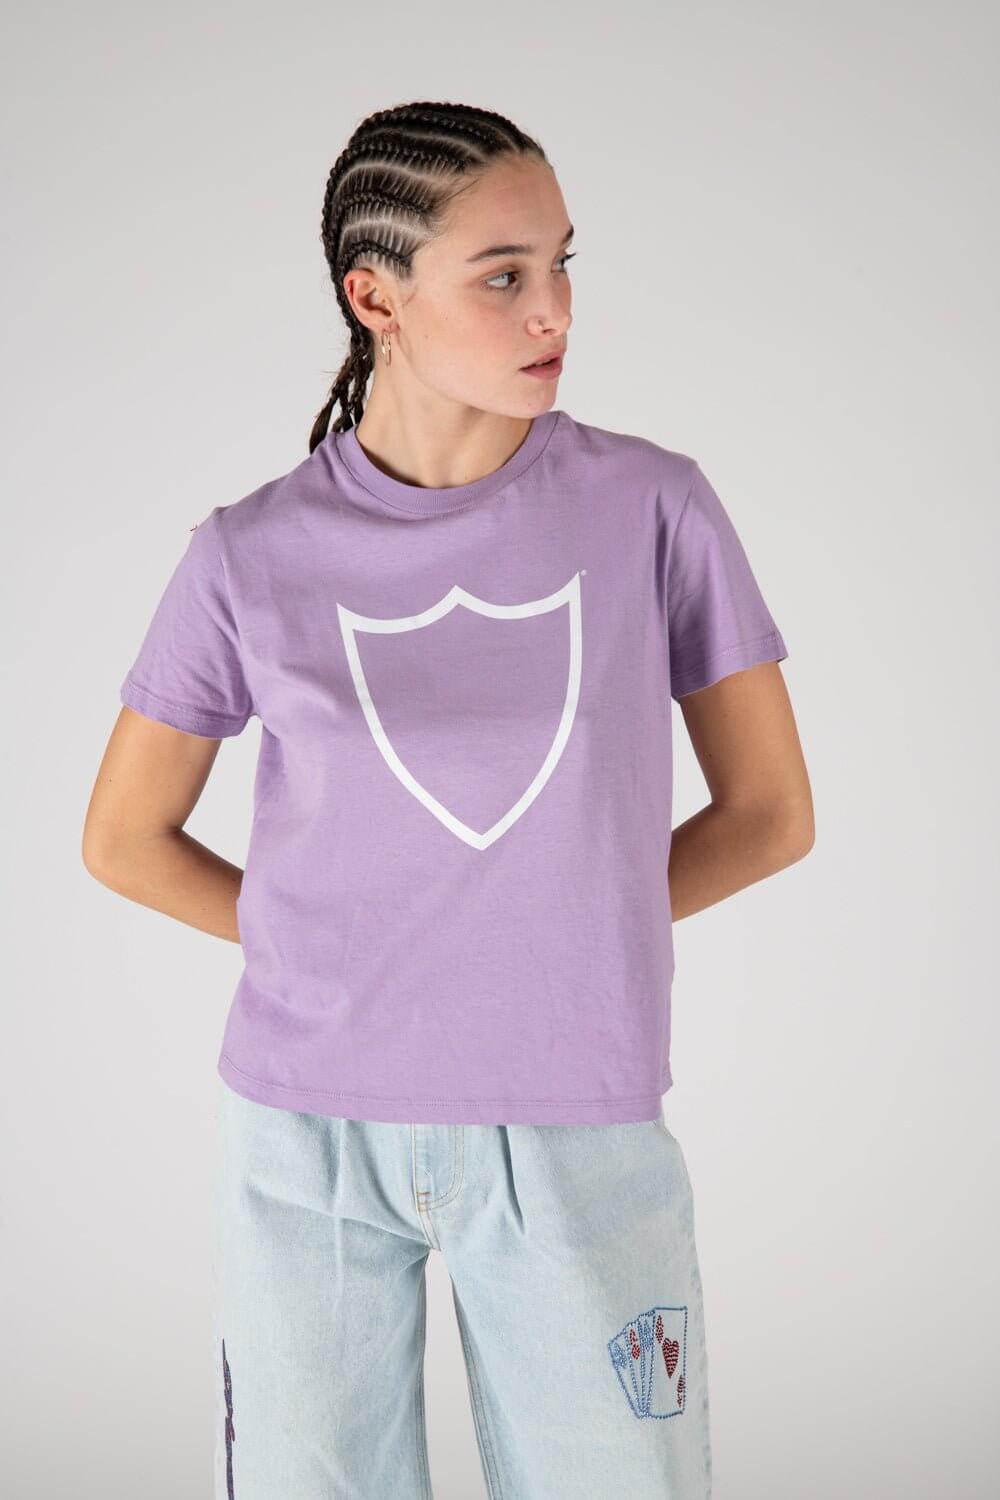 HTC LOGO WOMAN Slim fit t-shirt with printed shield logo on the front. Composition: 100% Cotton HTC LOS ANGELES